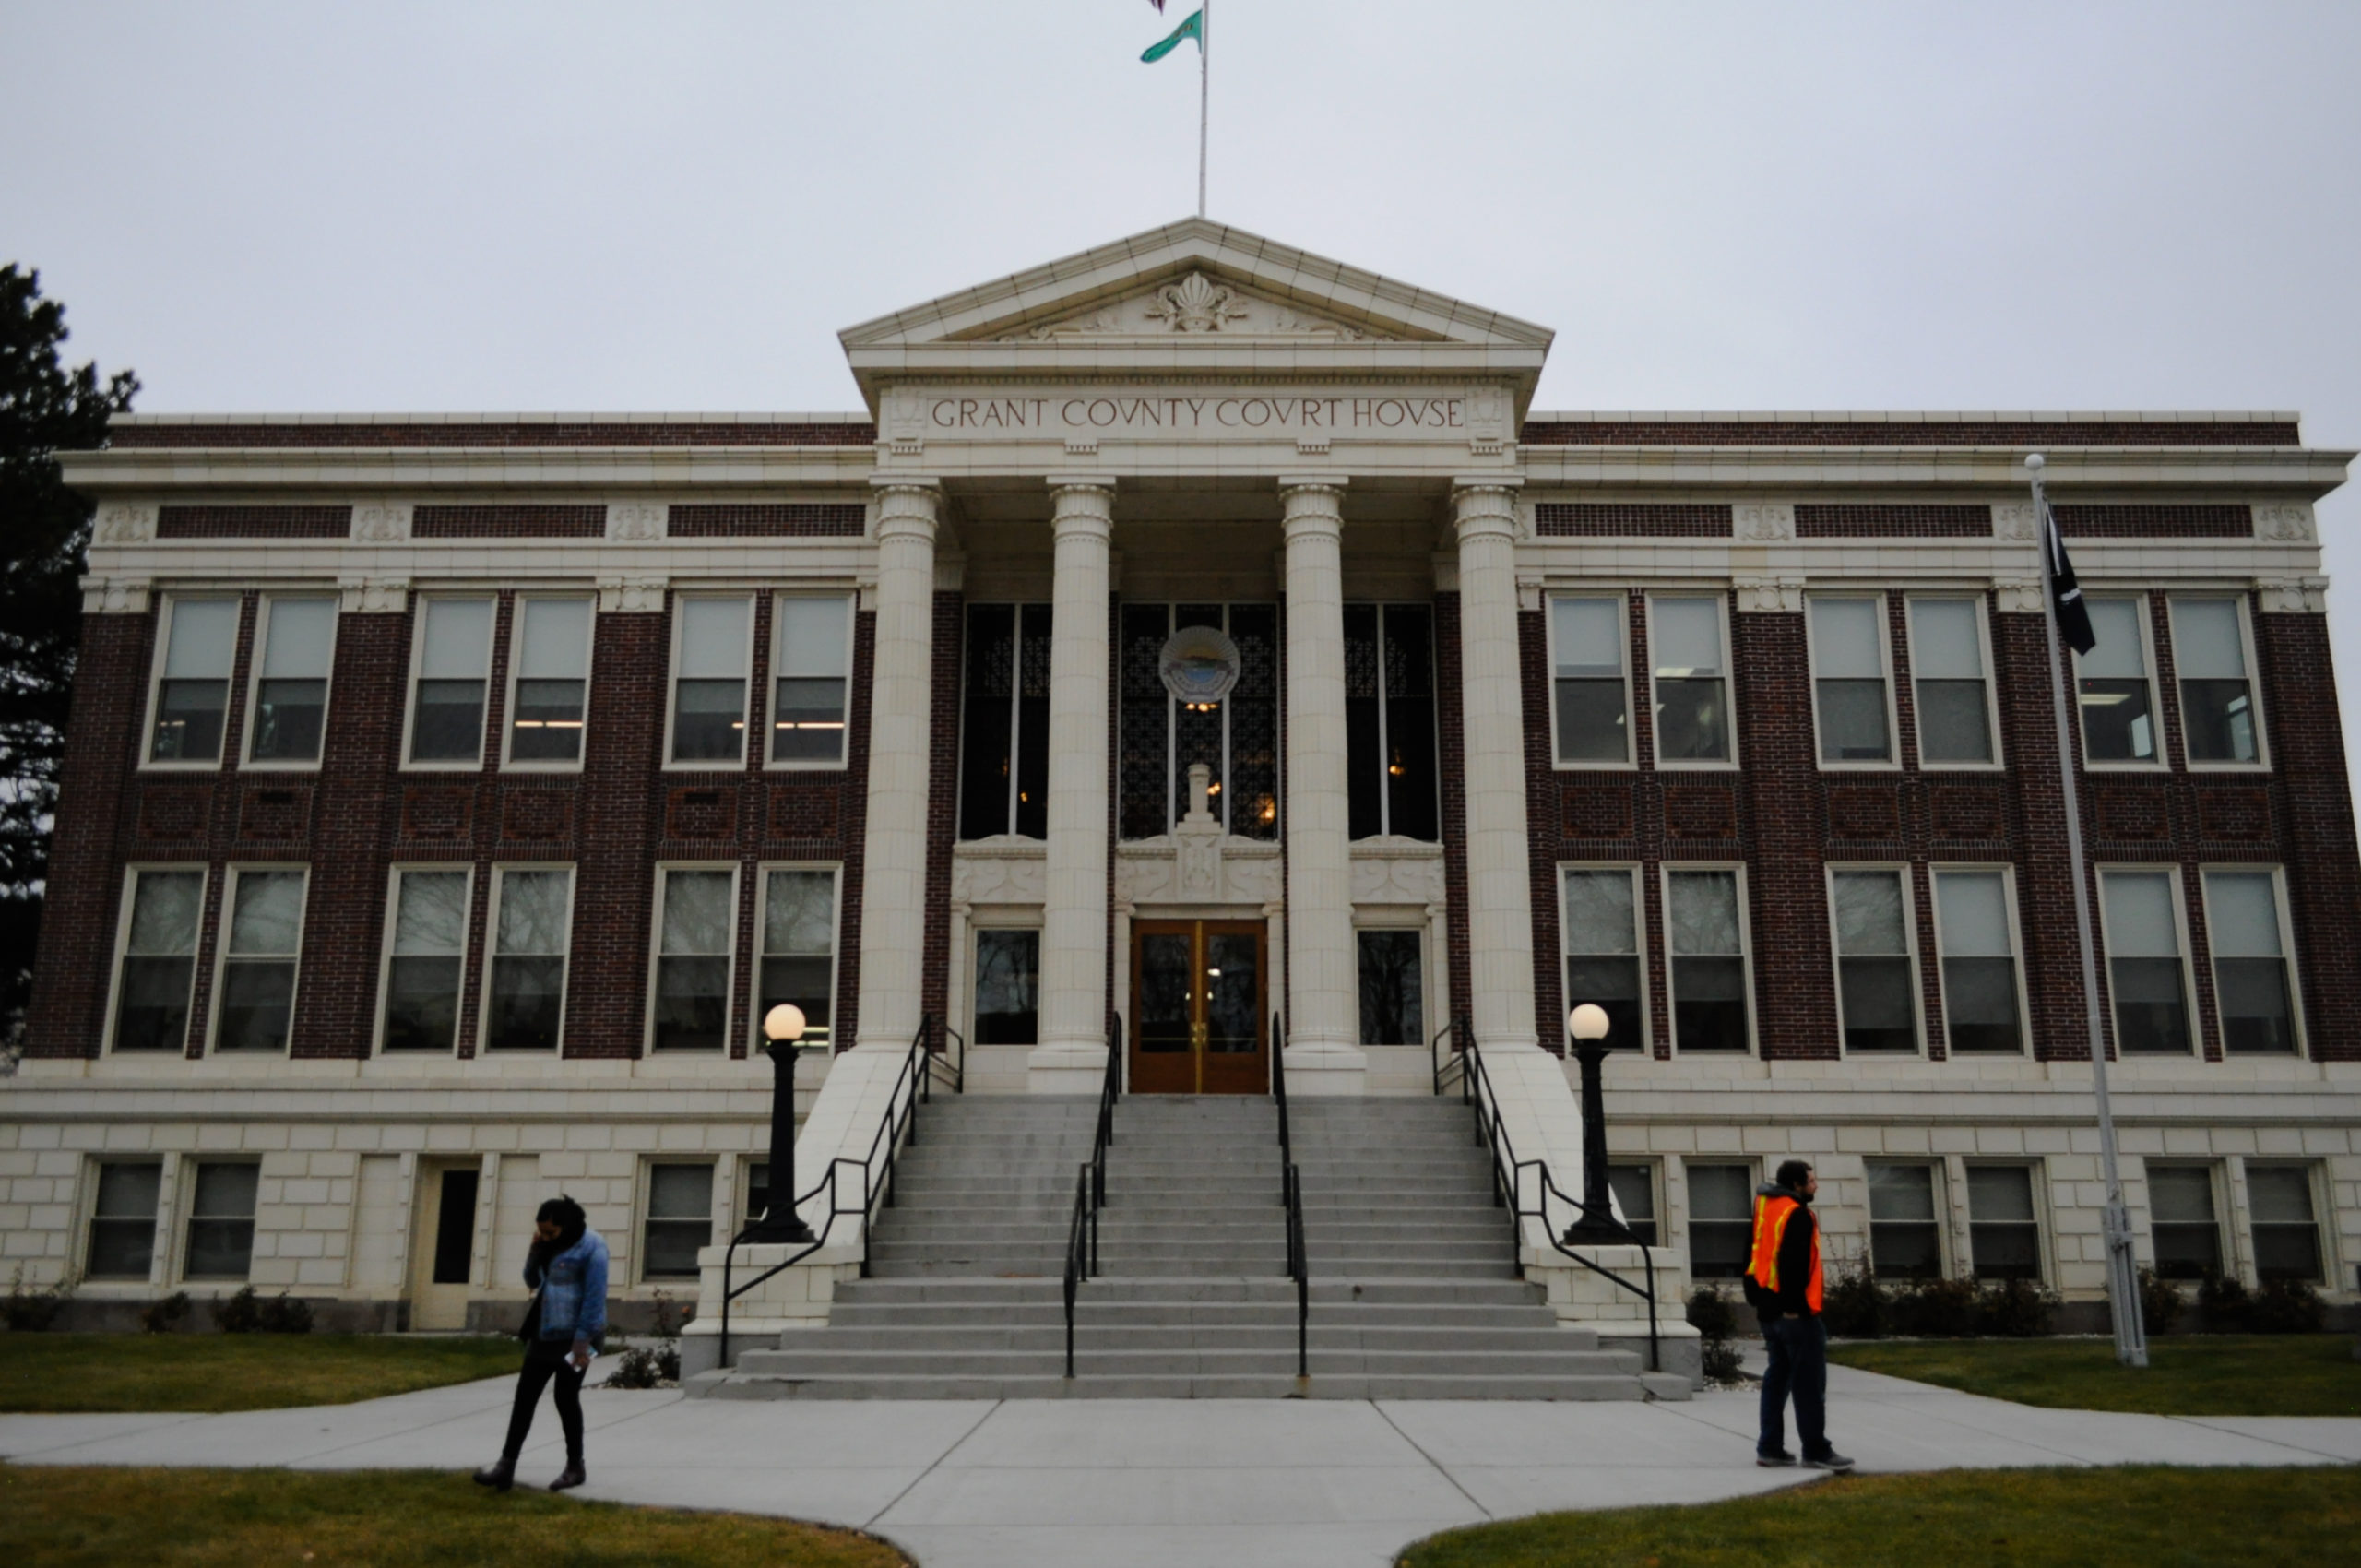 The Grant County Courthouse in Ephrata, pictured in November 2019, where federal immigration authorities have been spotted arresting undocumented people going to court since 2017. In front of the courthouse steps, Brenda Rodriguez with the Washington Immigrant Solidarity Network takes a phone call while a volunteer hands out “Know Your Rights” pamphlets. CREDIT: Enrique Pérez de la Rosa/NWPB